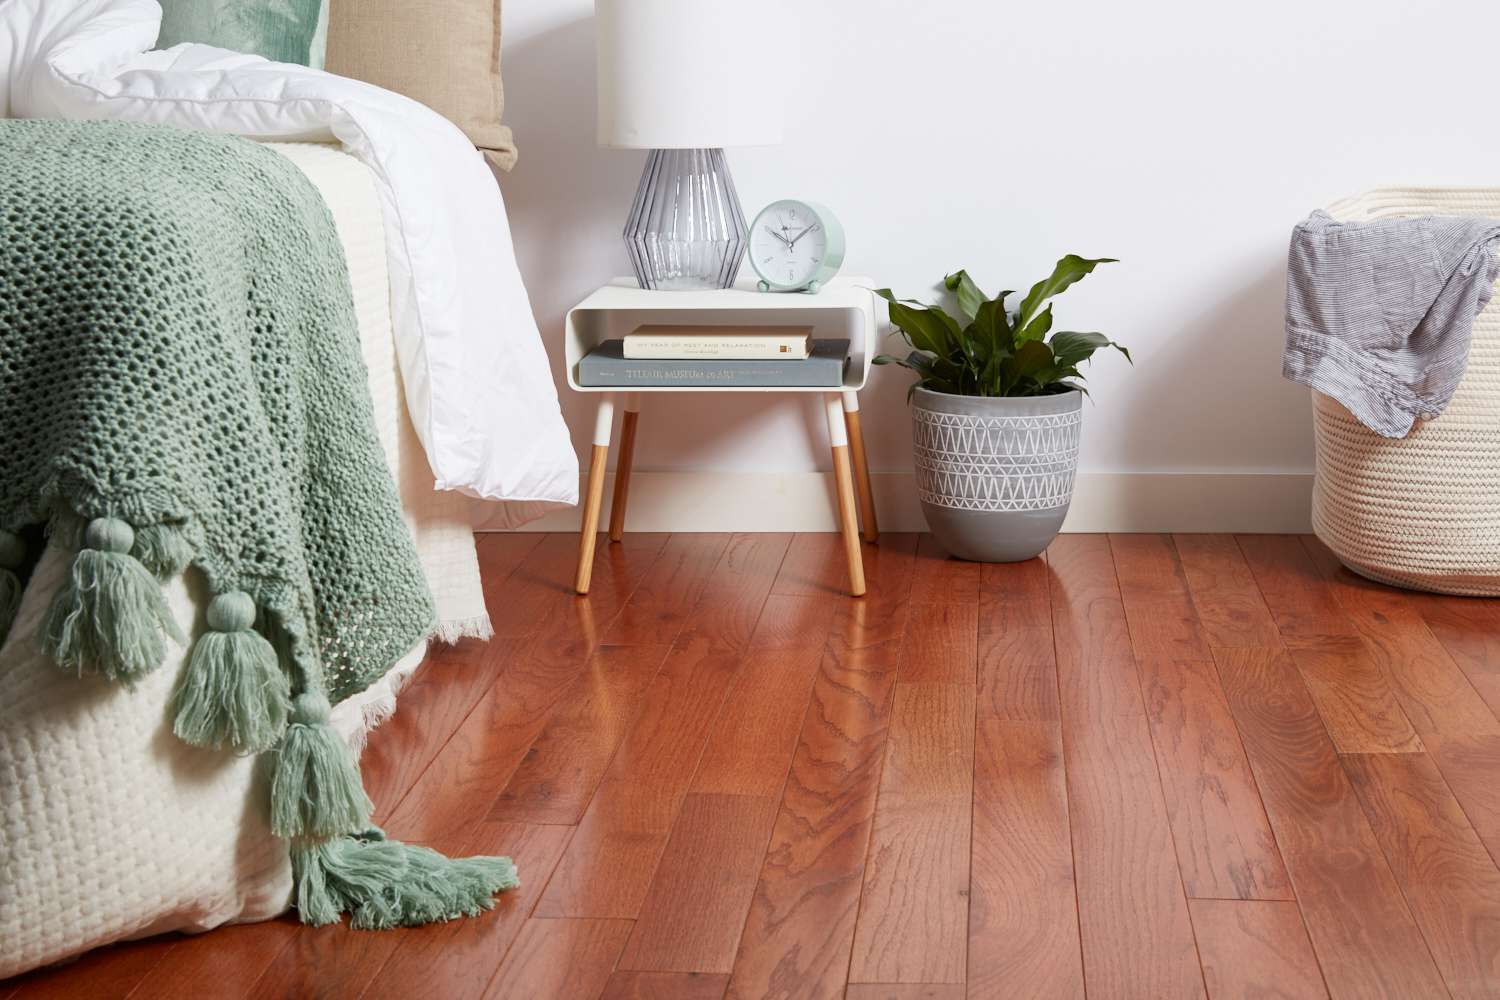 4 Reasons To Use Hardwood Flooring For Your Home